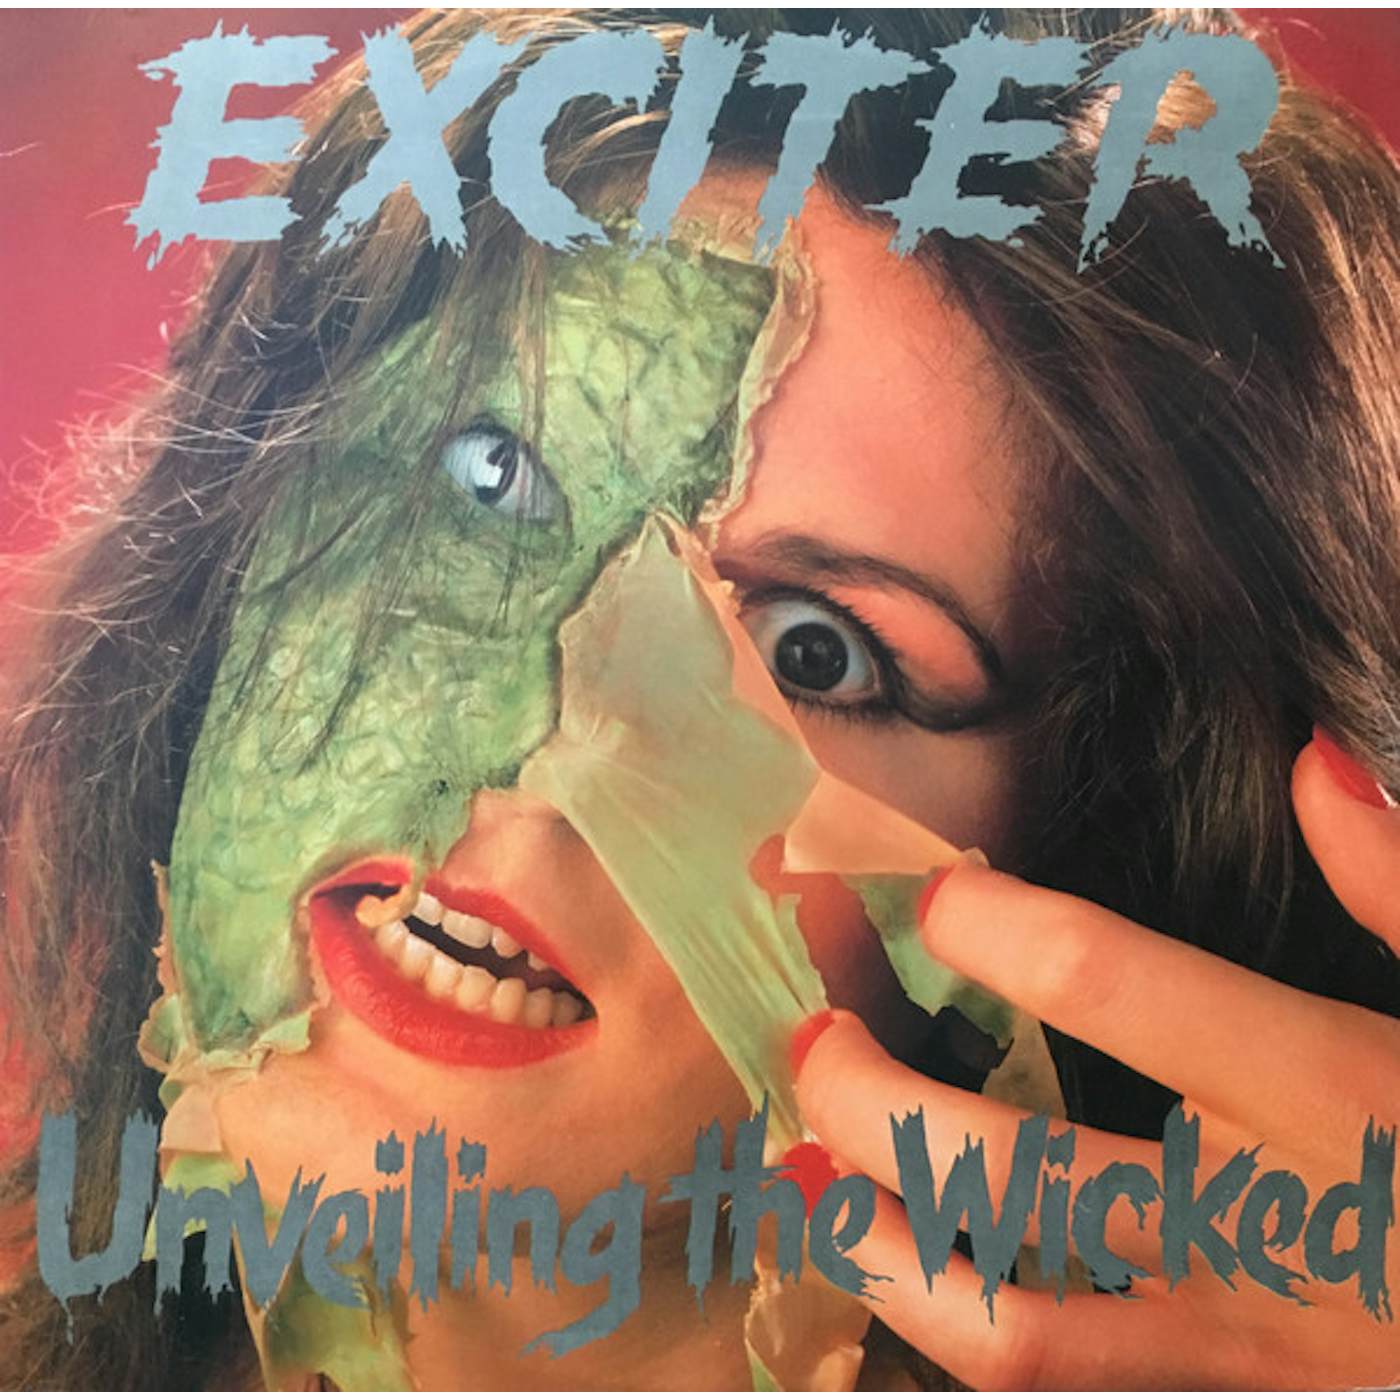 Exciter Unveiling The Wicked Vinyl Record